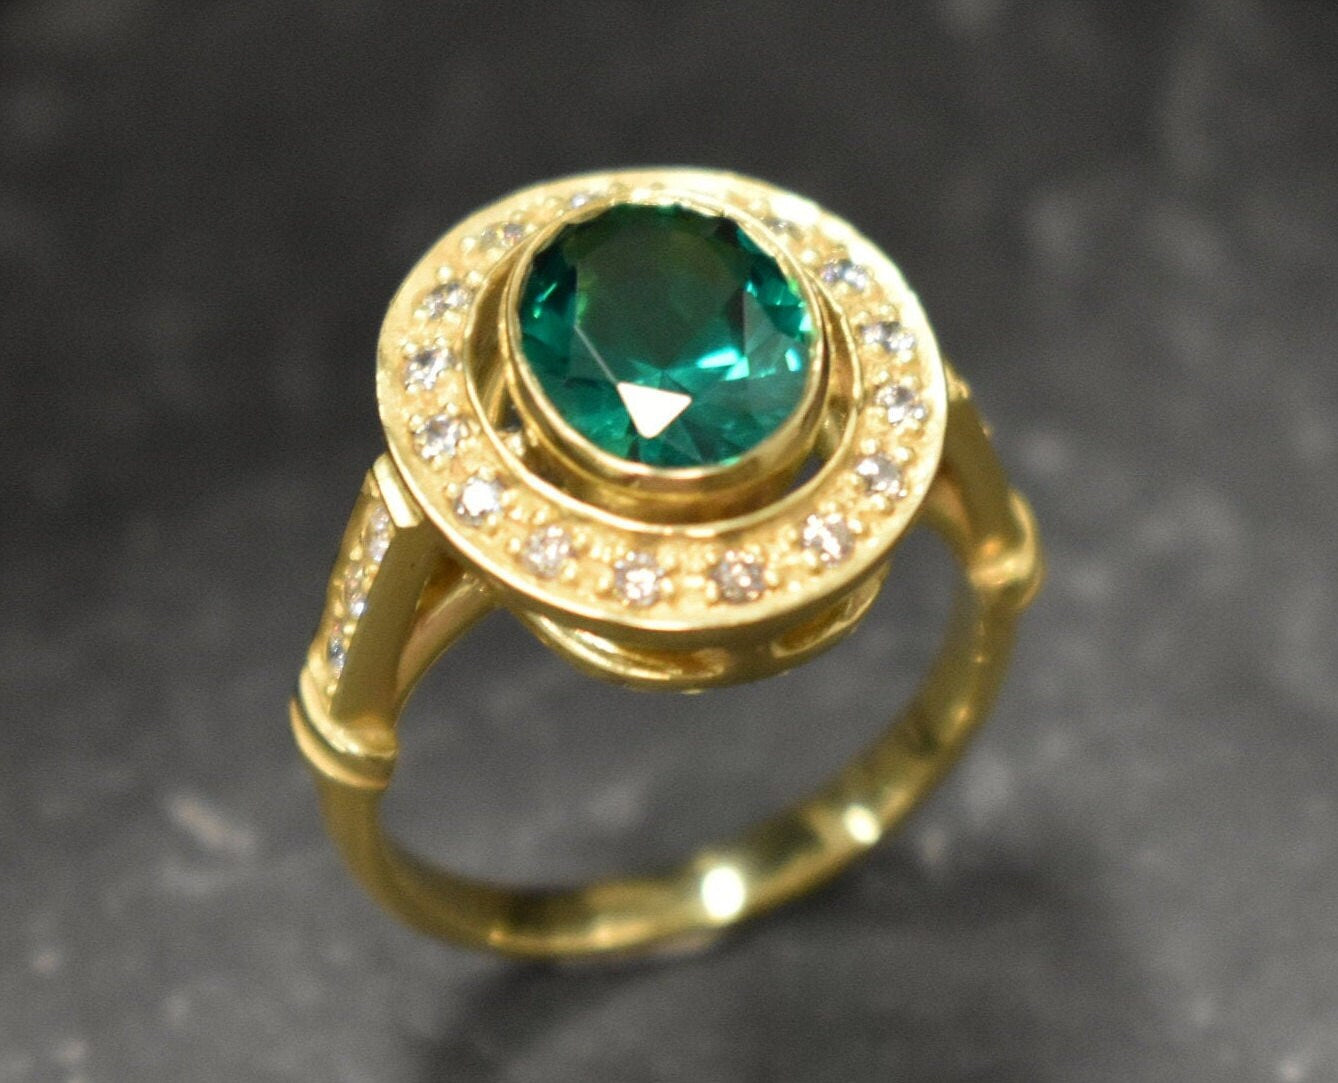 Gold Emerald Ring, Gold Antique Ring, Gold Vintage Ring, Antique Emerald Ring, Antique Rings, Sterling Silver Ring, Created Emerald Ring